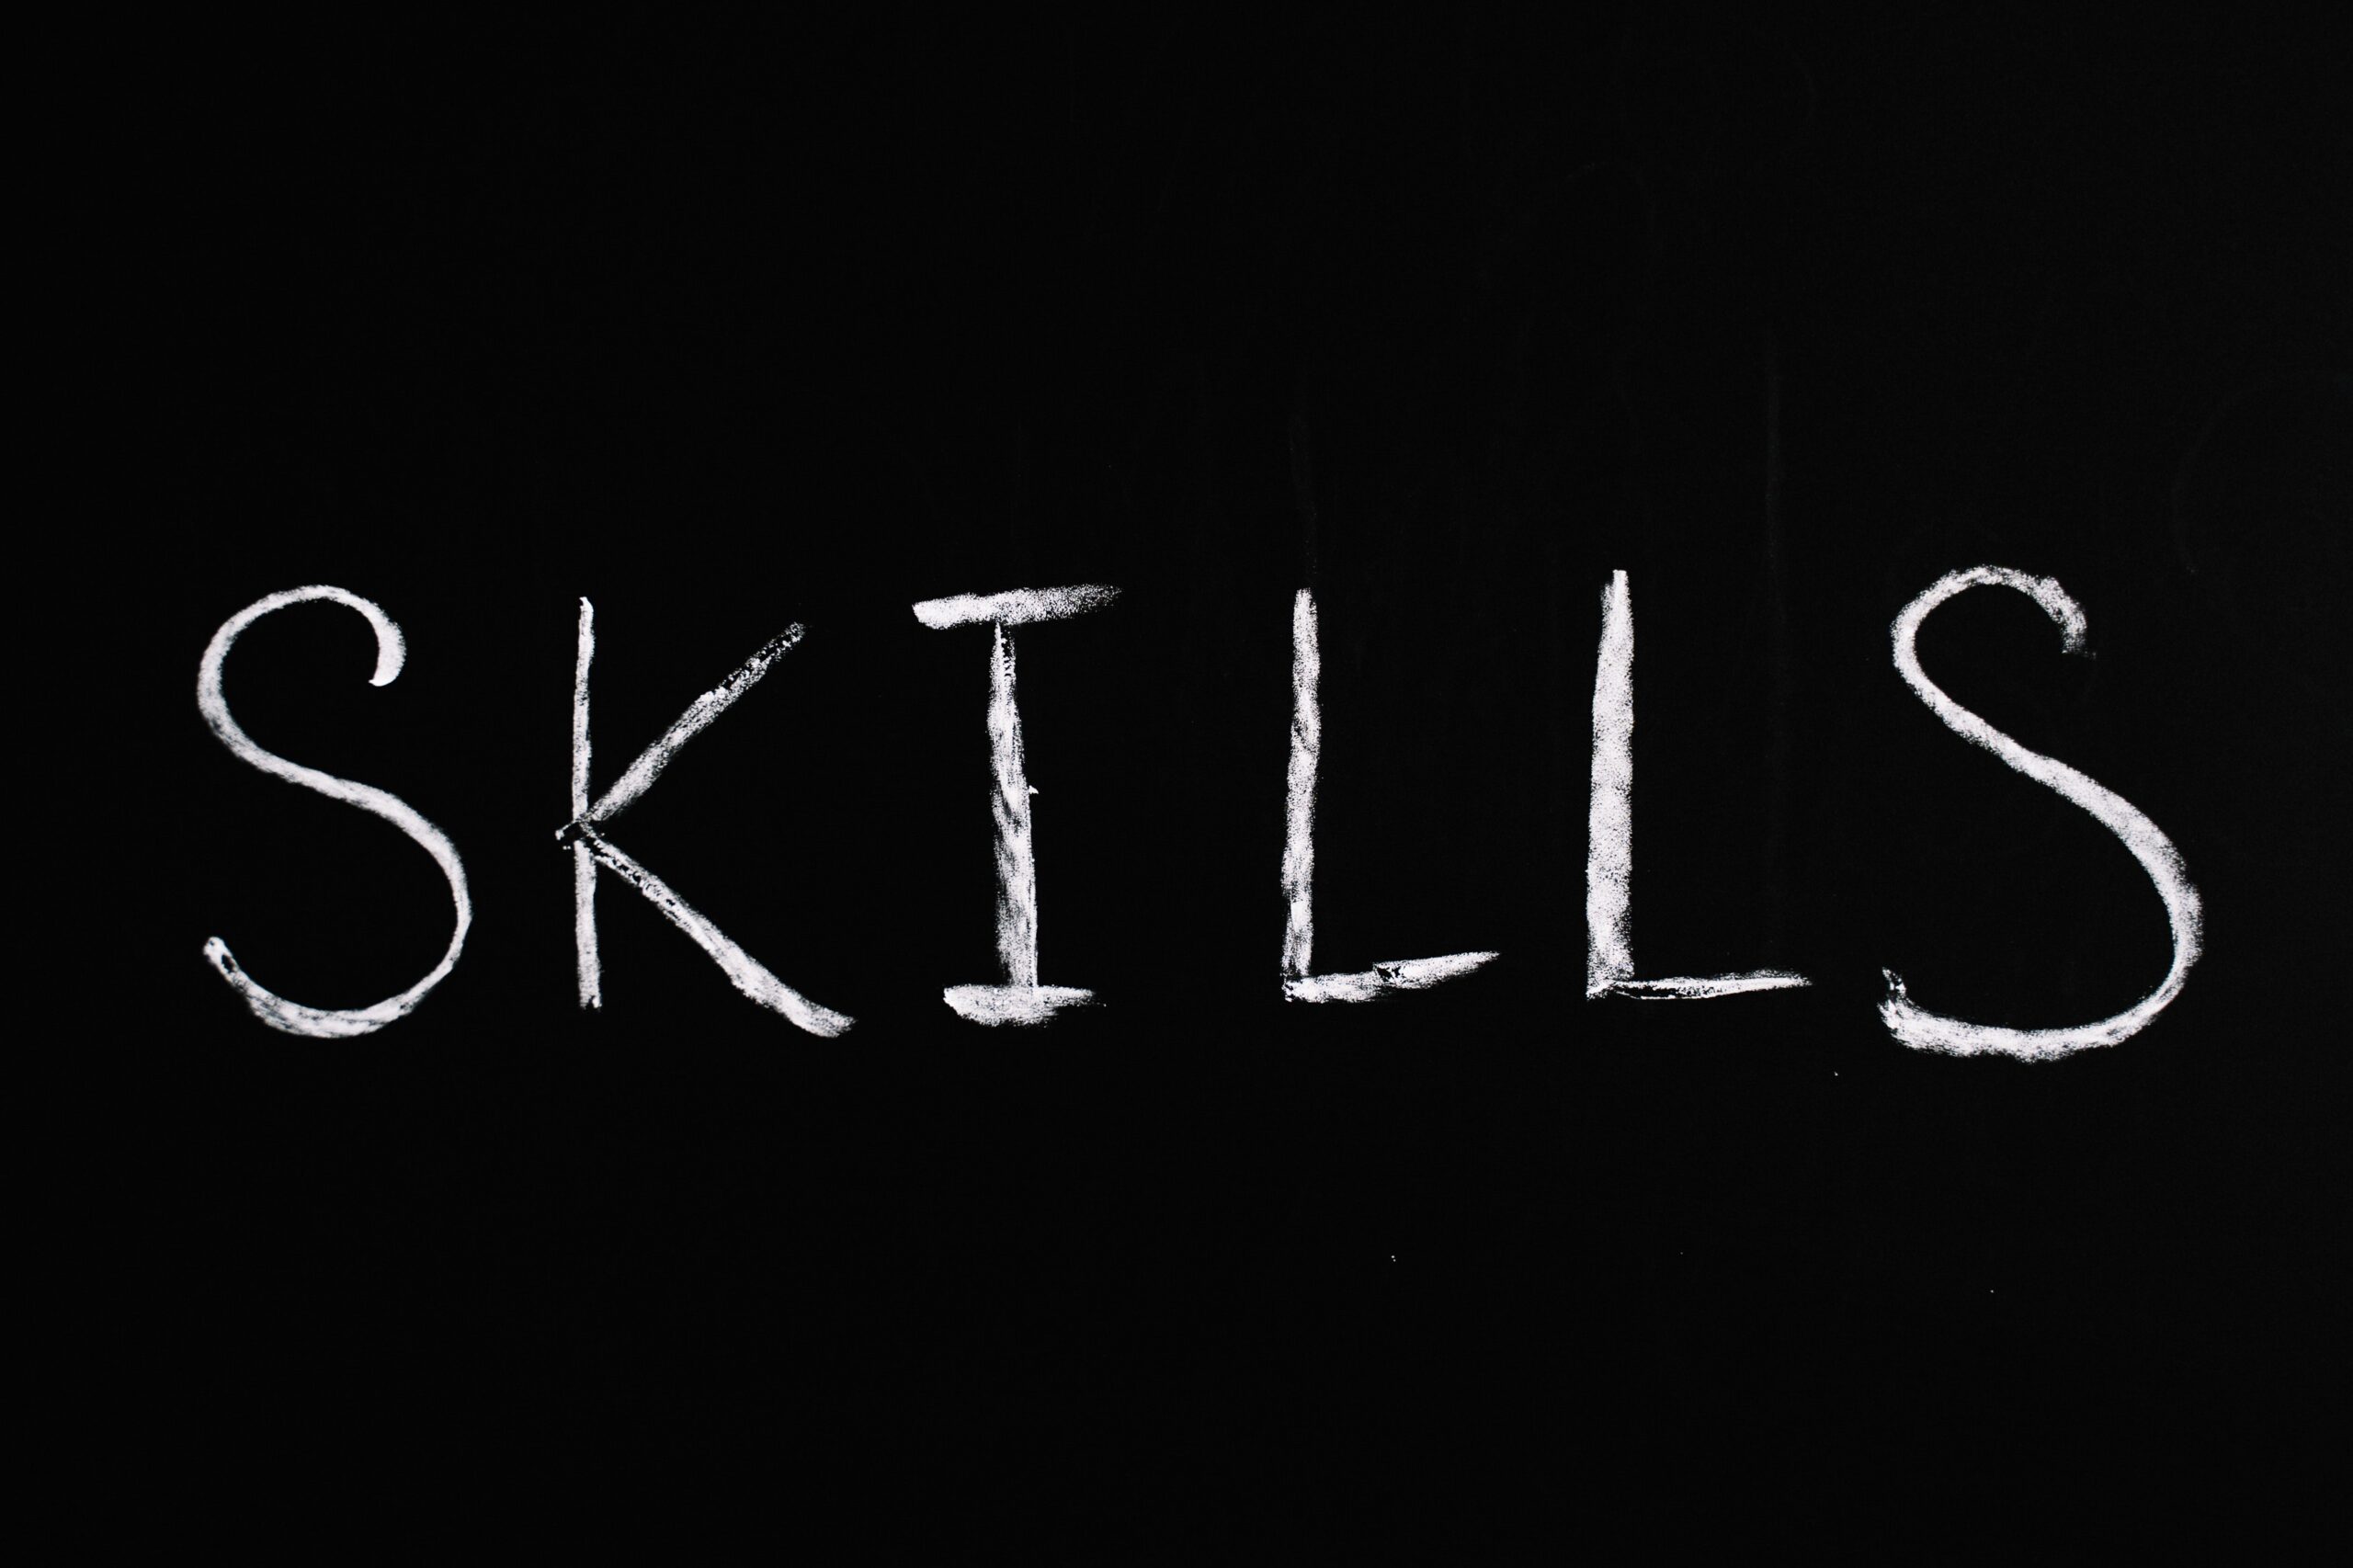 The "skills" in white on a black background